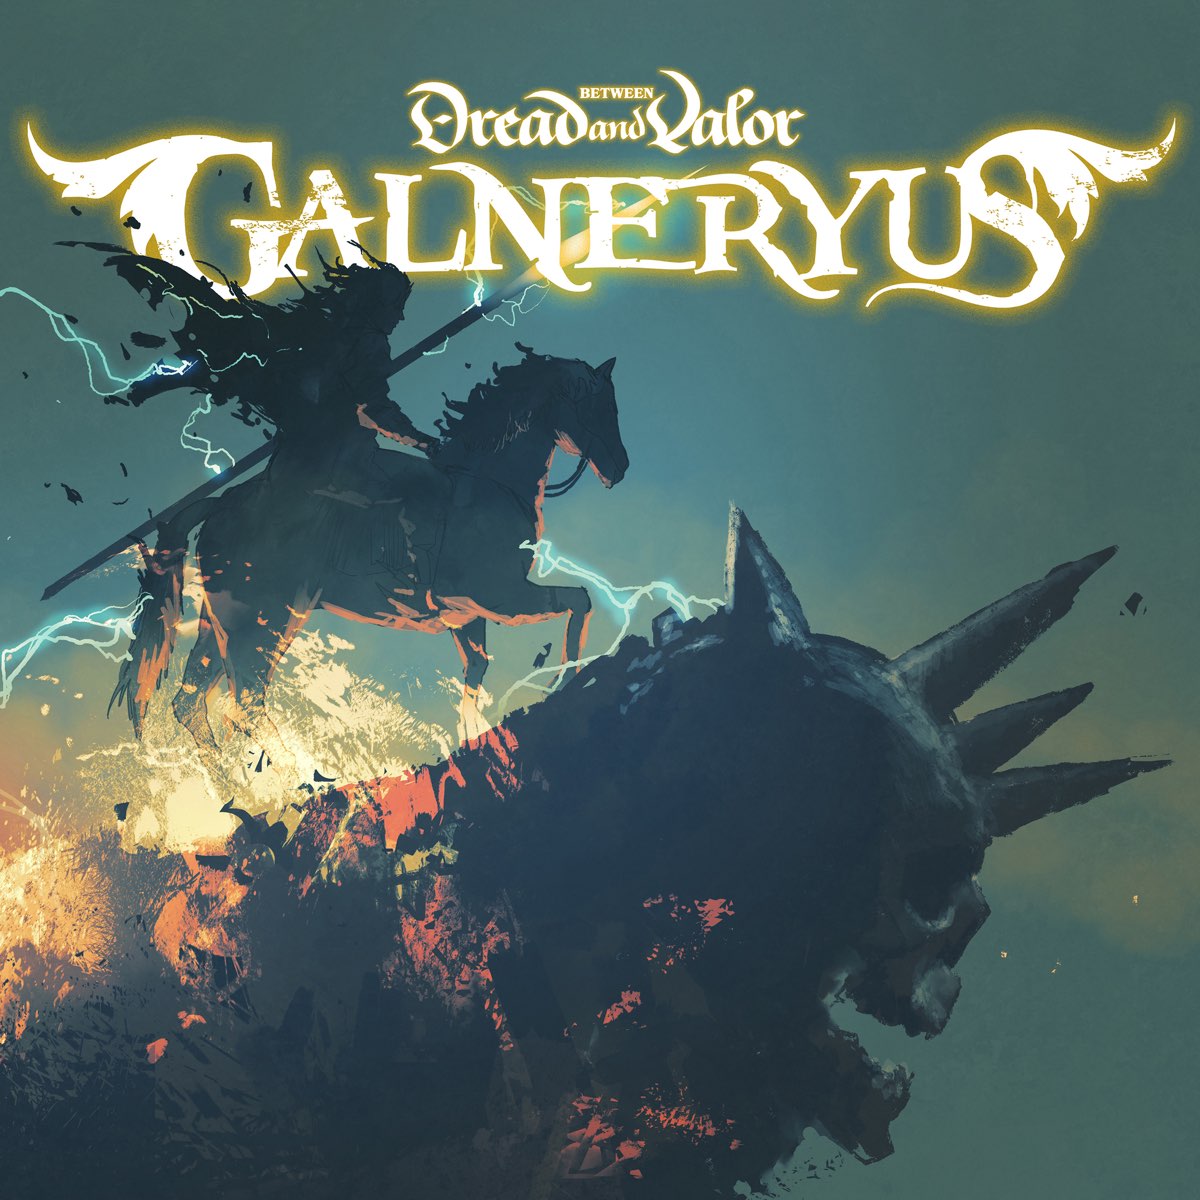 BETWEEN DREAD AND VALOR by GALNERYUS on Apple Music